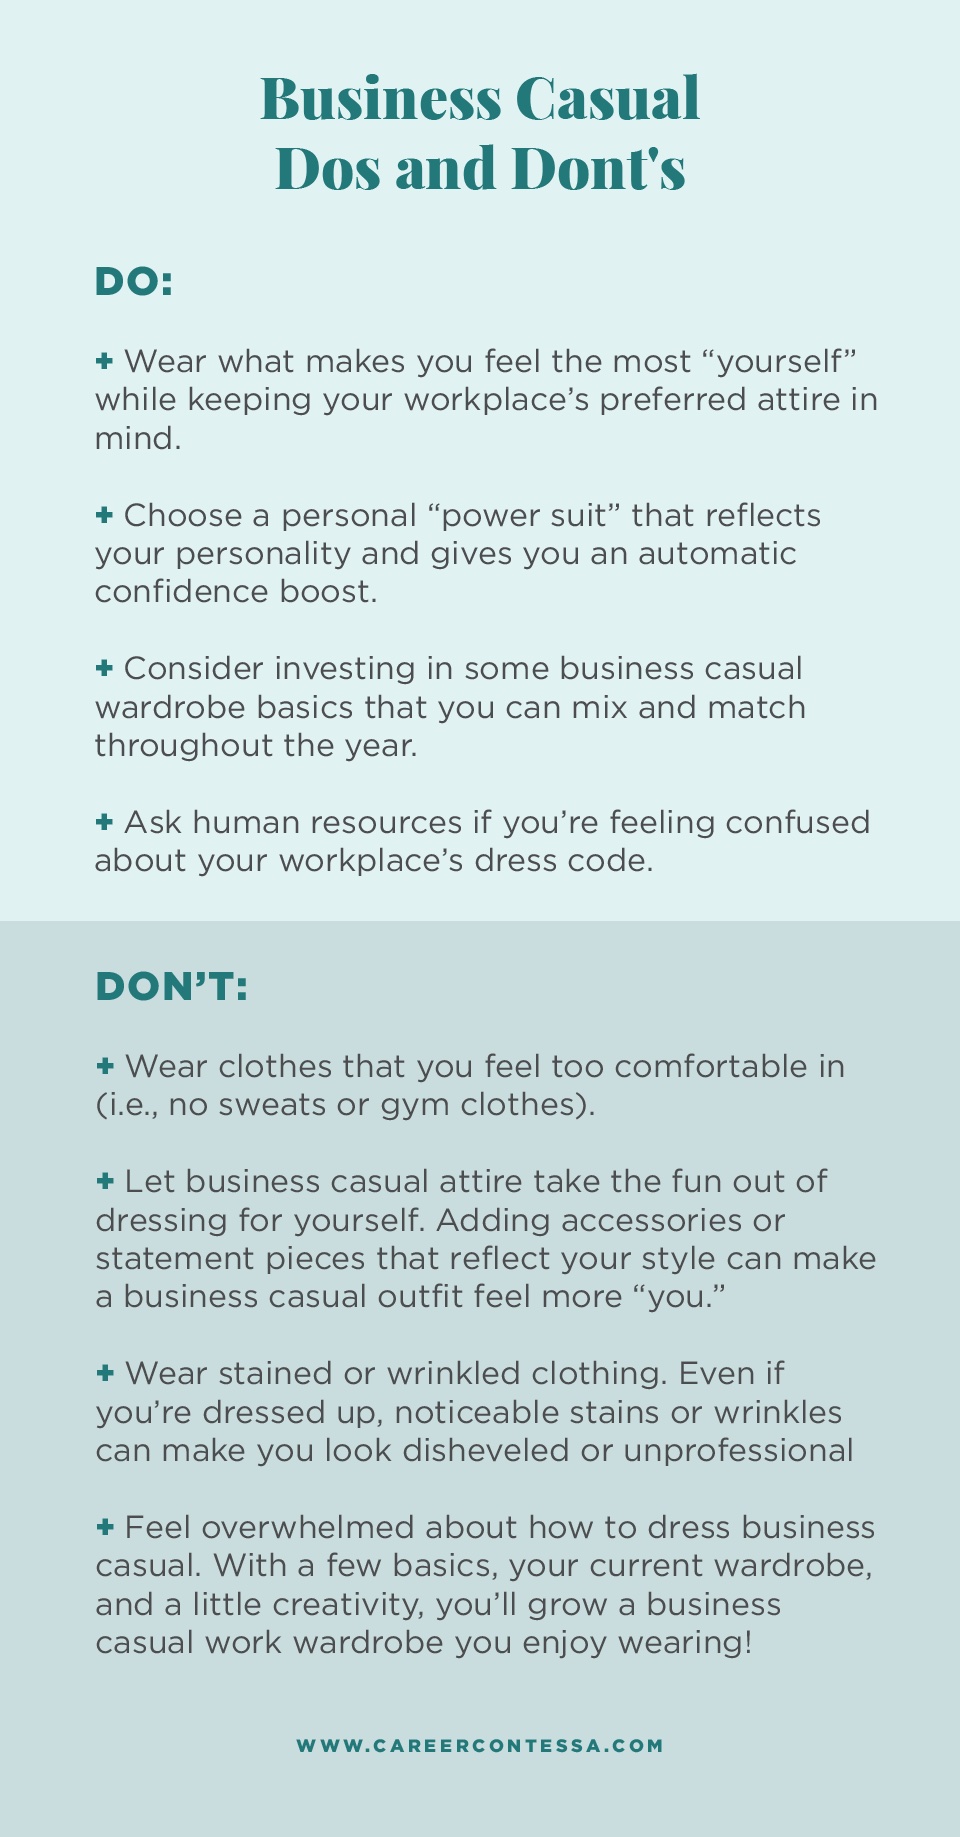 What To Wear To Work By Dress Code - Business Casual